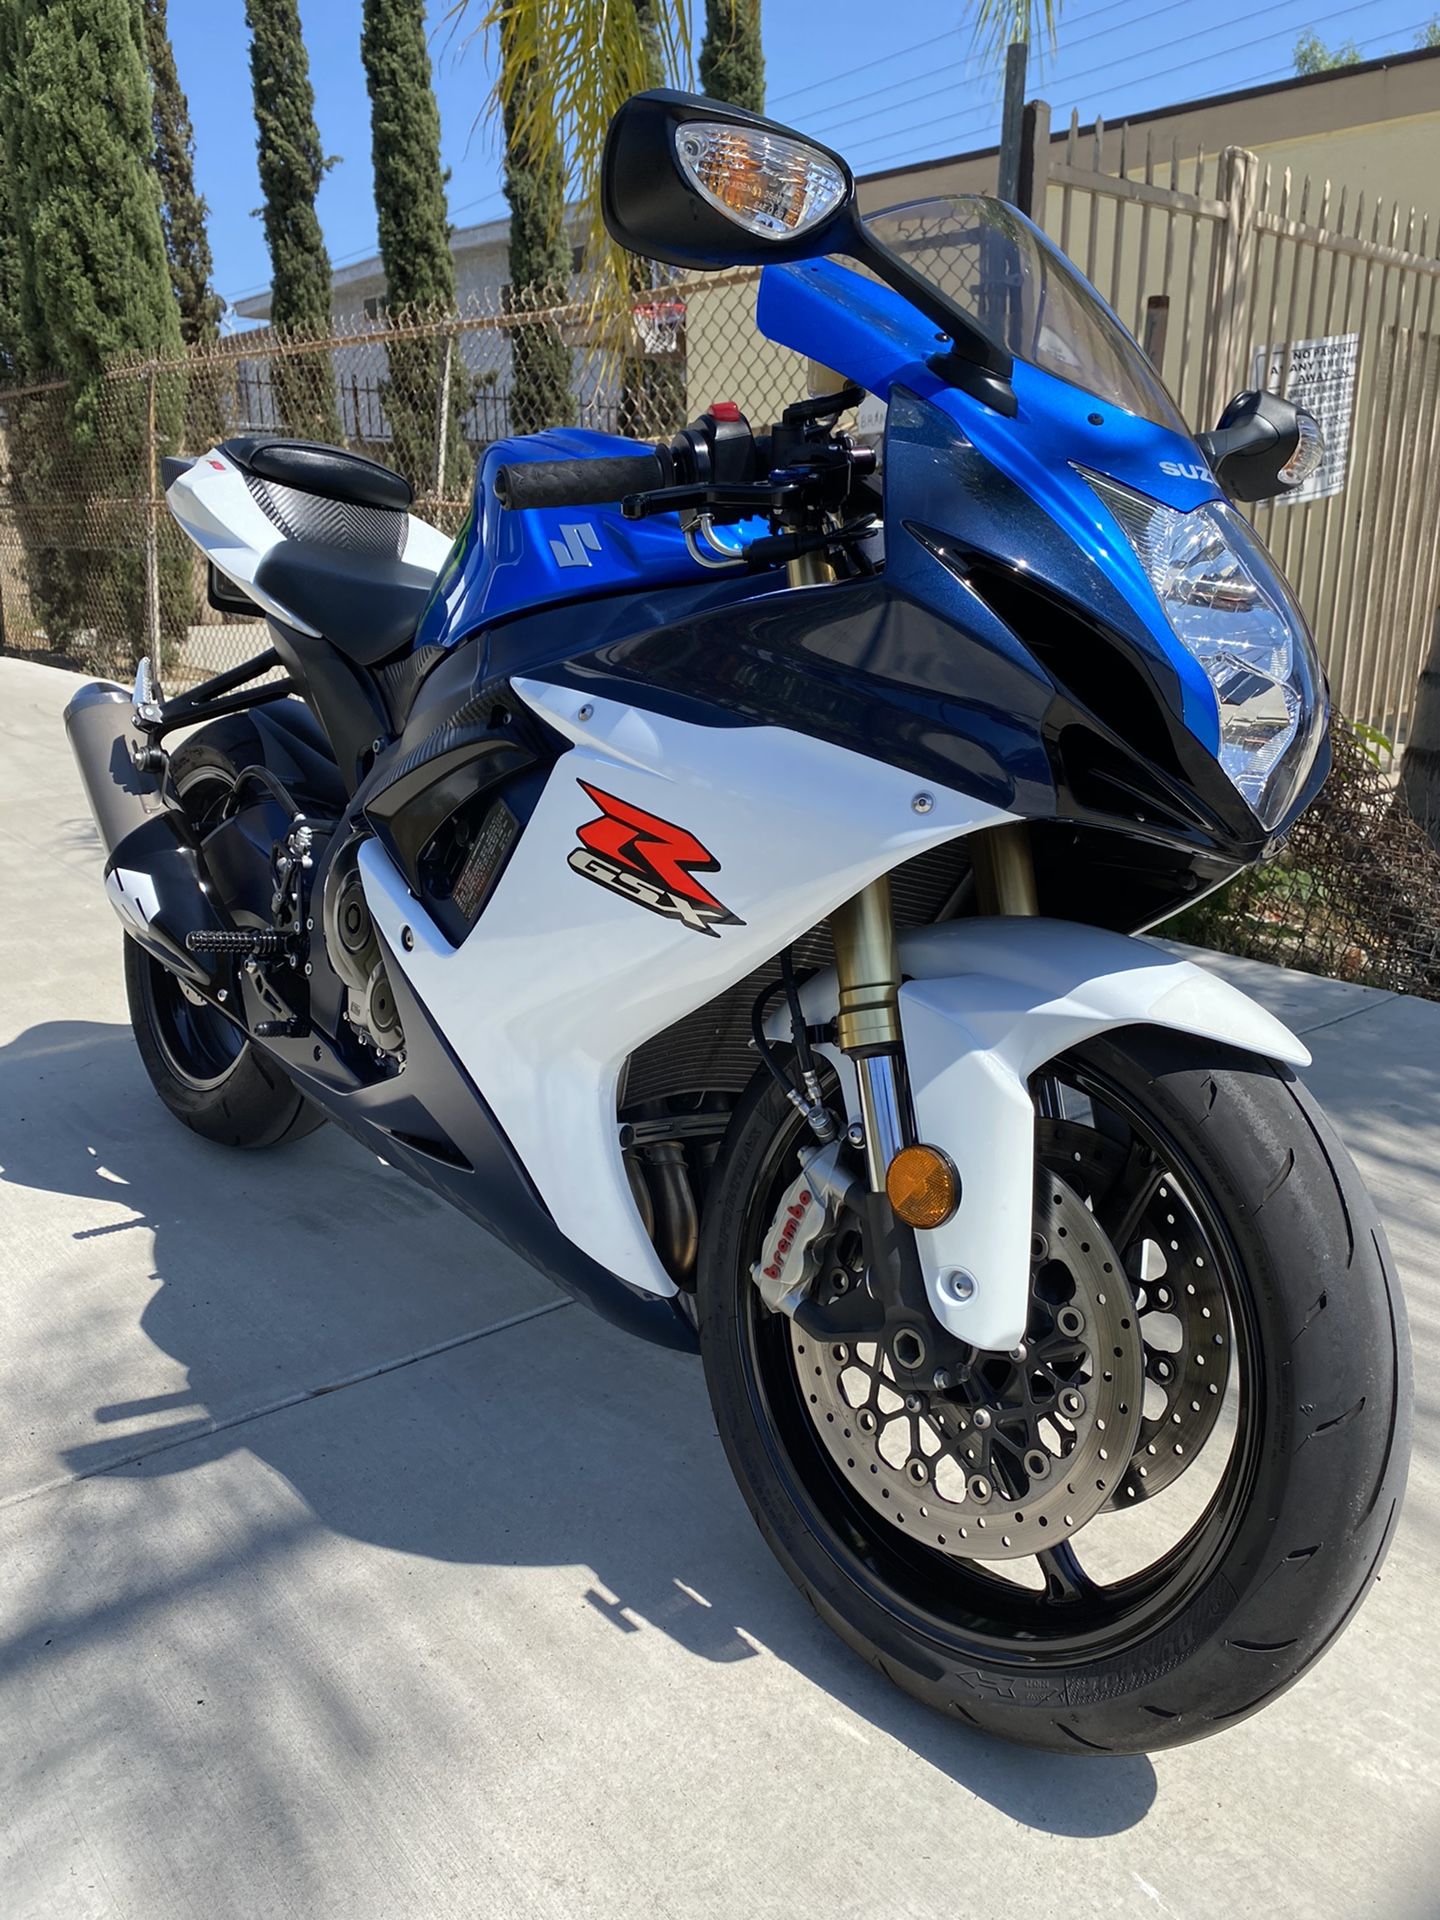 2011 SUZUKI GSXR 750 SHOWROOM CONDITION. Must see. Like a brand new bike in everyway. Low miles. 1 owner.